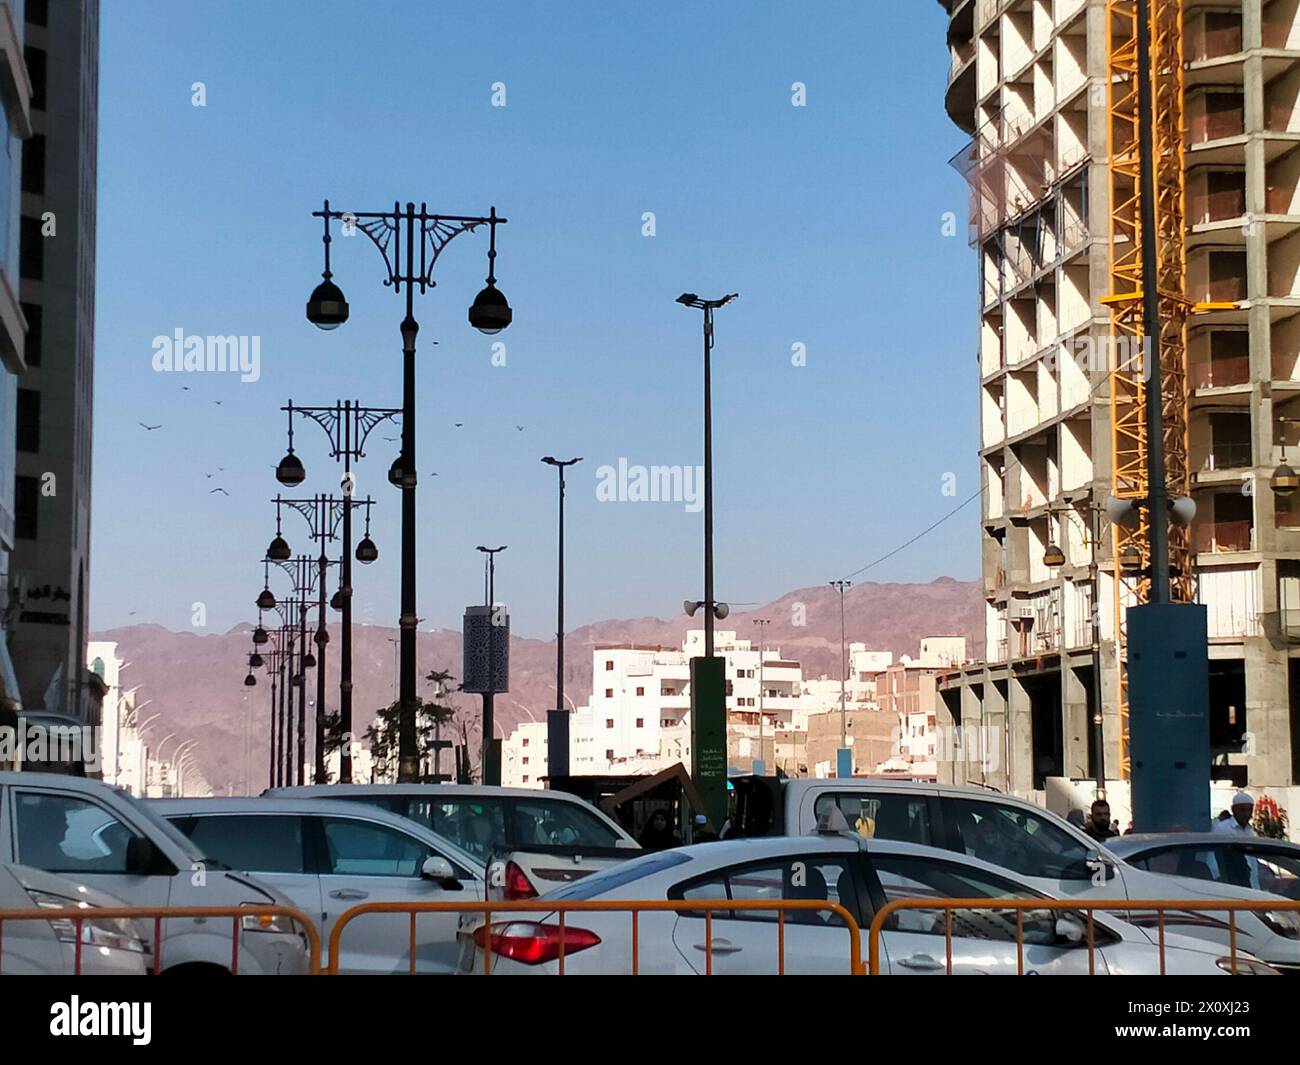 The highway in Medina, Saudi Arabia is busy with cars during the day Stock Photo